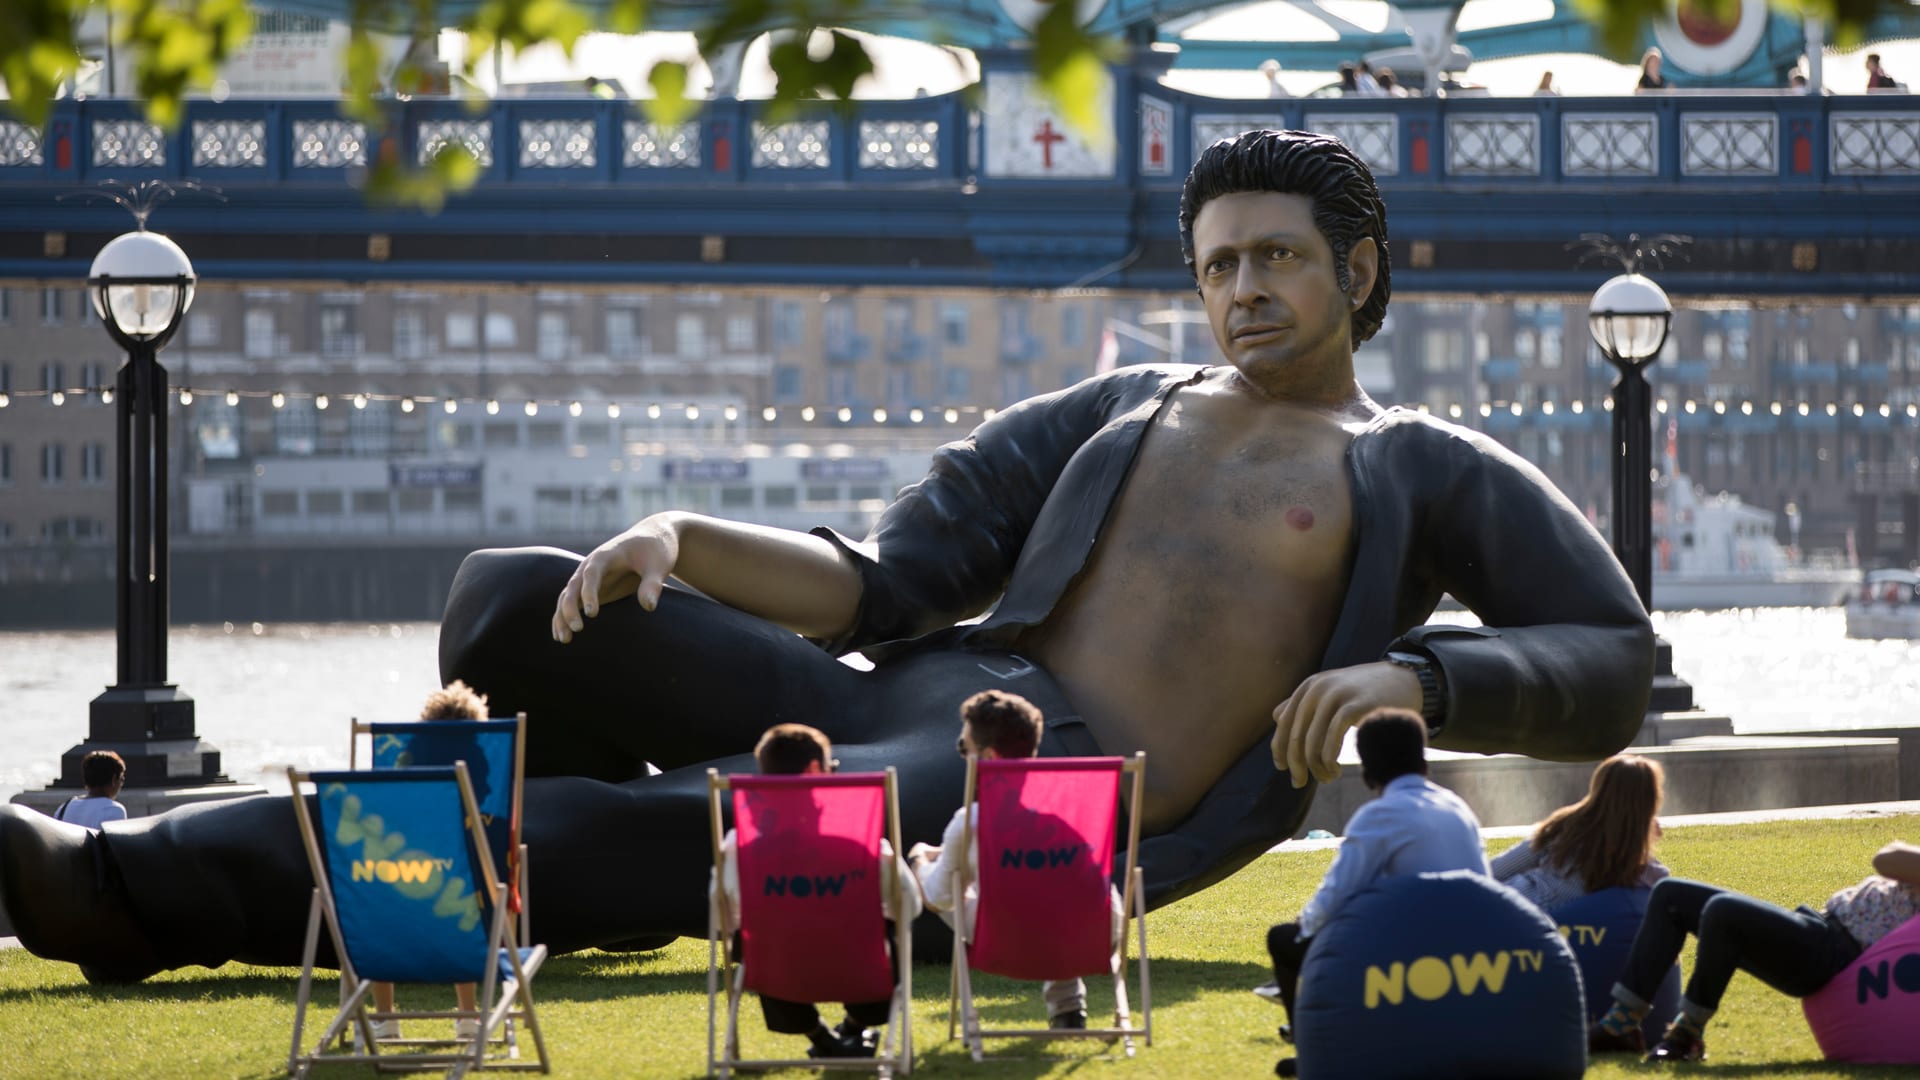 Life found a way for this 25-foot Jeff Goldblum statue in London